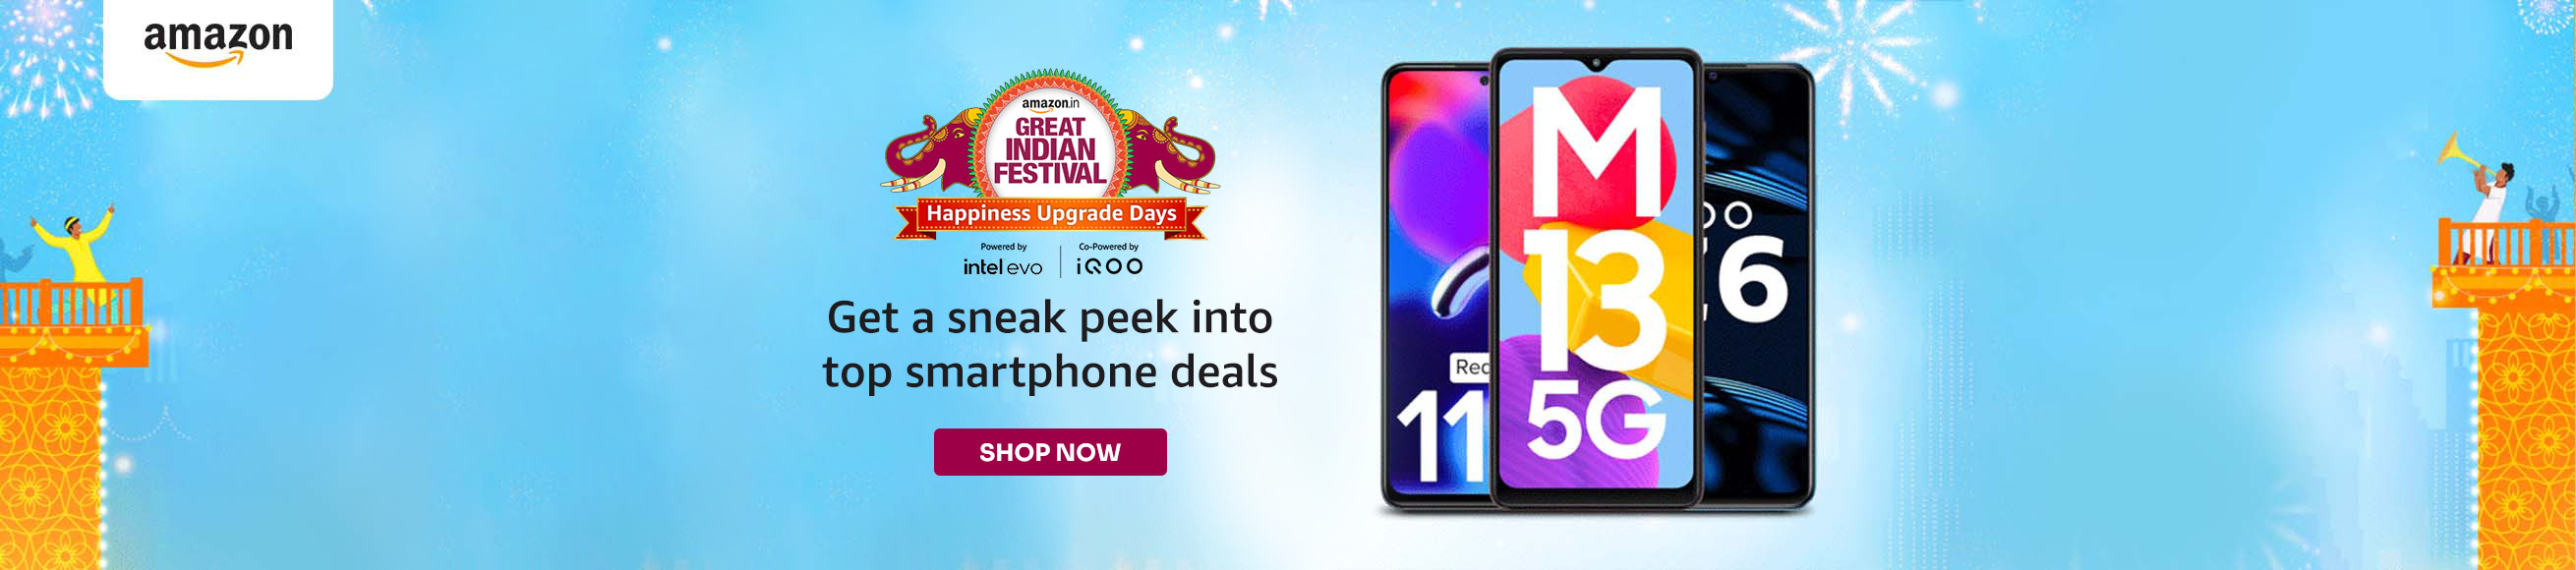 Amazon GREAT INDIAN FESTIVAL Offers on Mobile & Accessories - (Starts 23rd Sept)